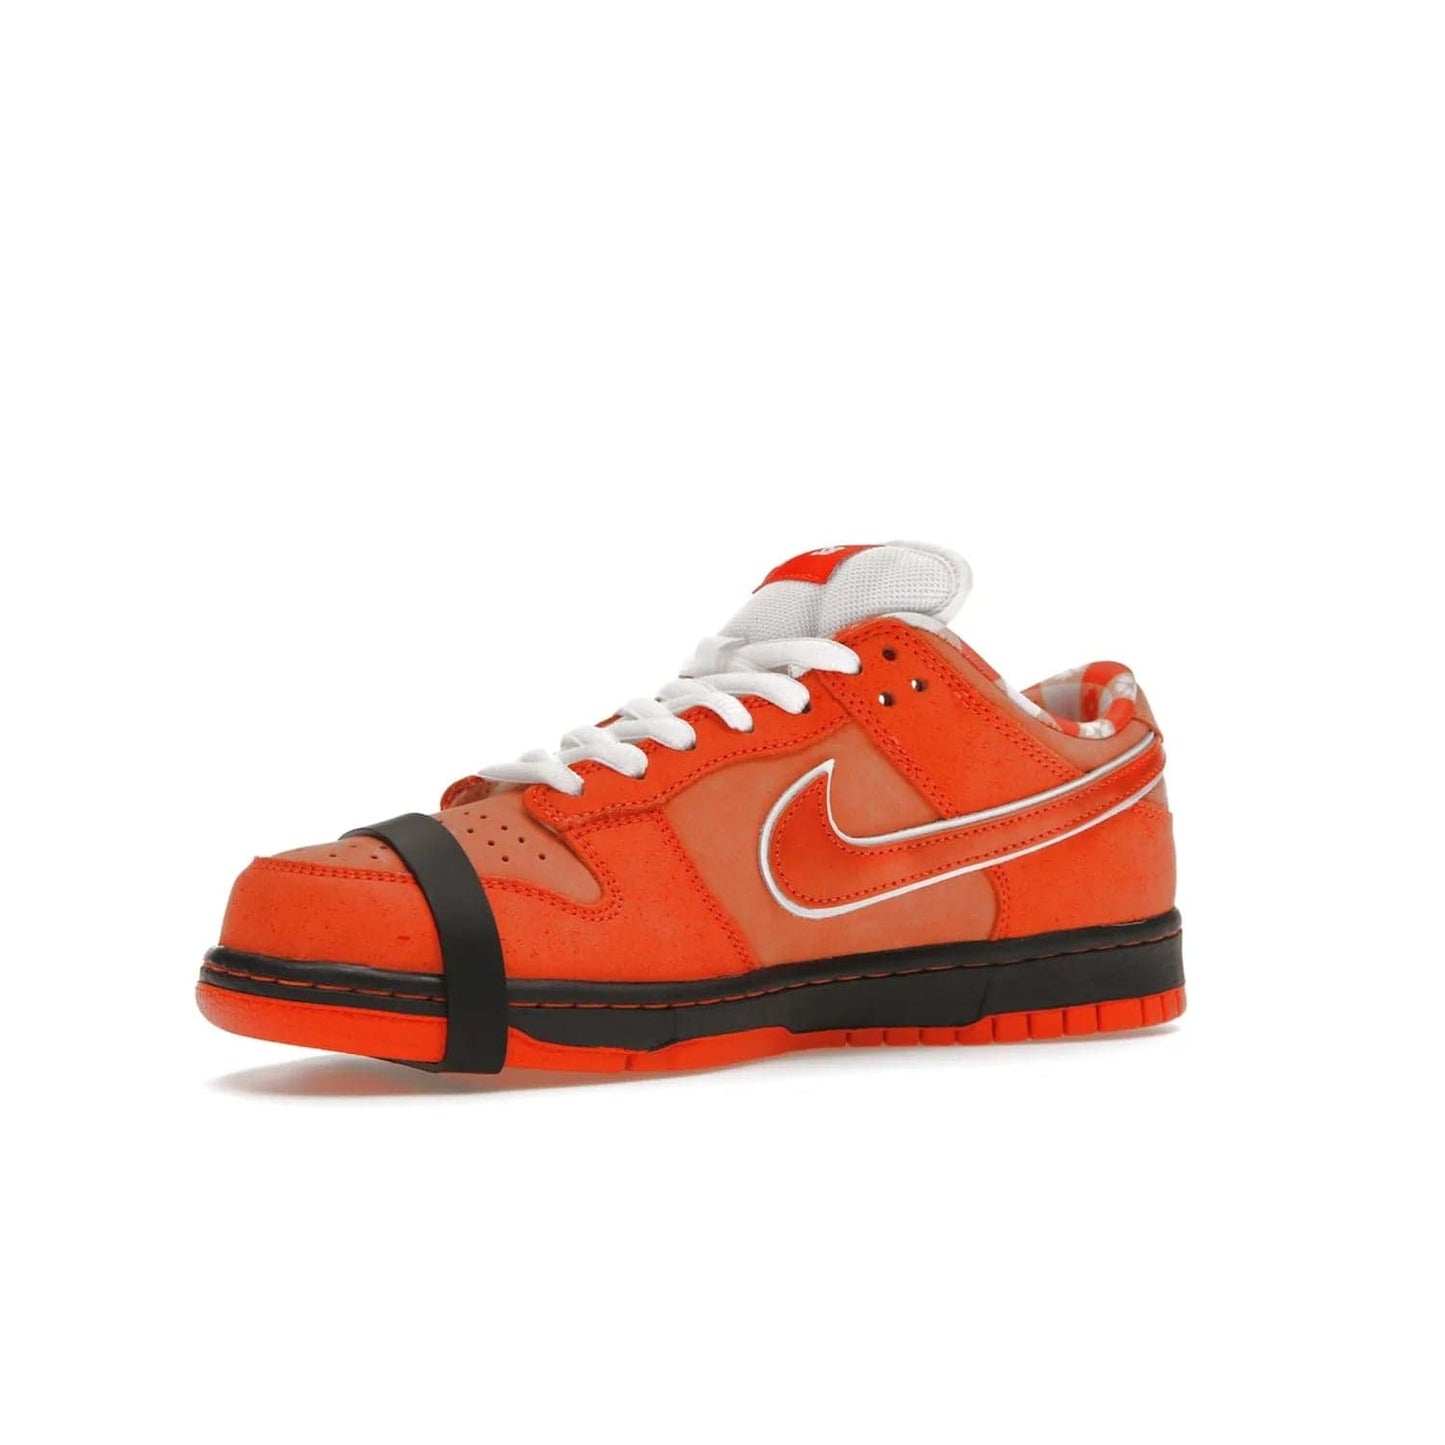 Nike SB Dunk Low Concepts Orange Lobster - Image 16 - Only at www.BallersClubKickz.com - Make a statement with the Nike SB Dunk Low Concepts Orange Lobster. Variety of orange hues, nubuck upper, bib-inspired lining & rubber outsole create bold look & comfortable blend of style. Available December 20th, 2022.